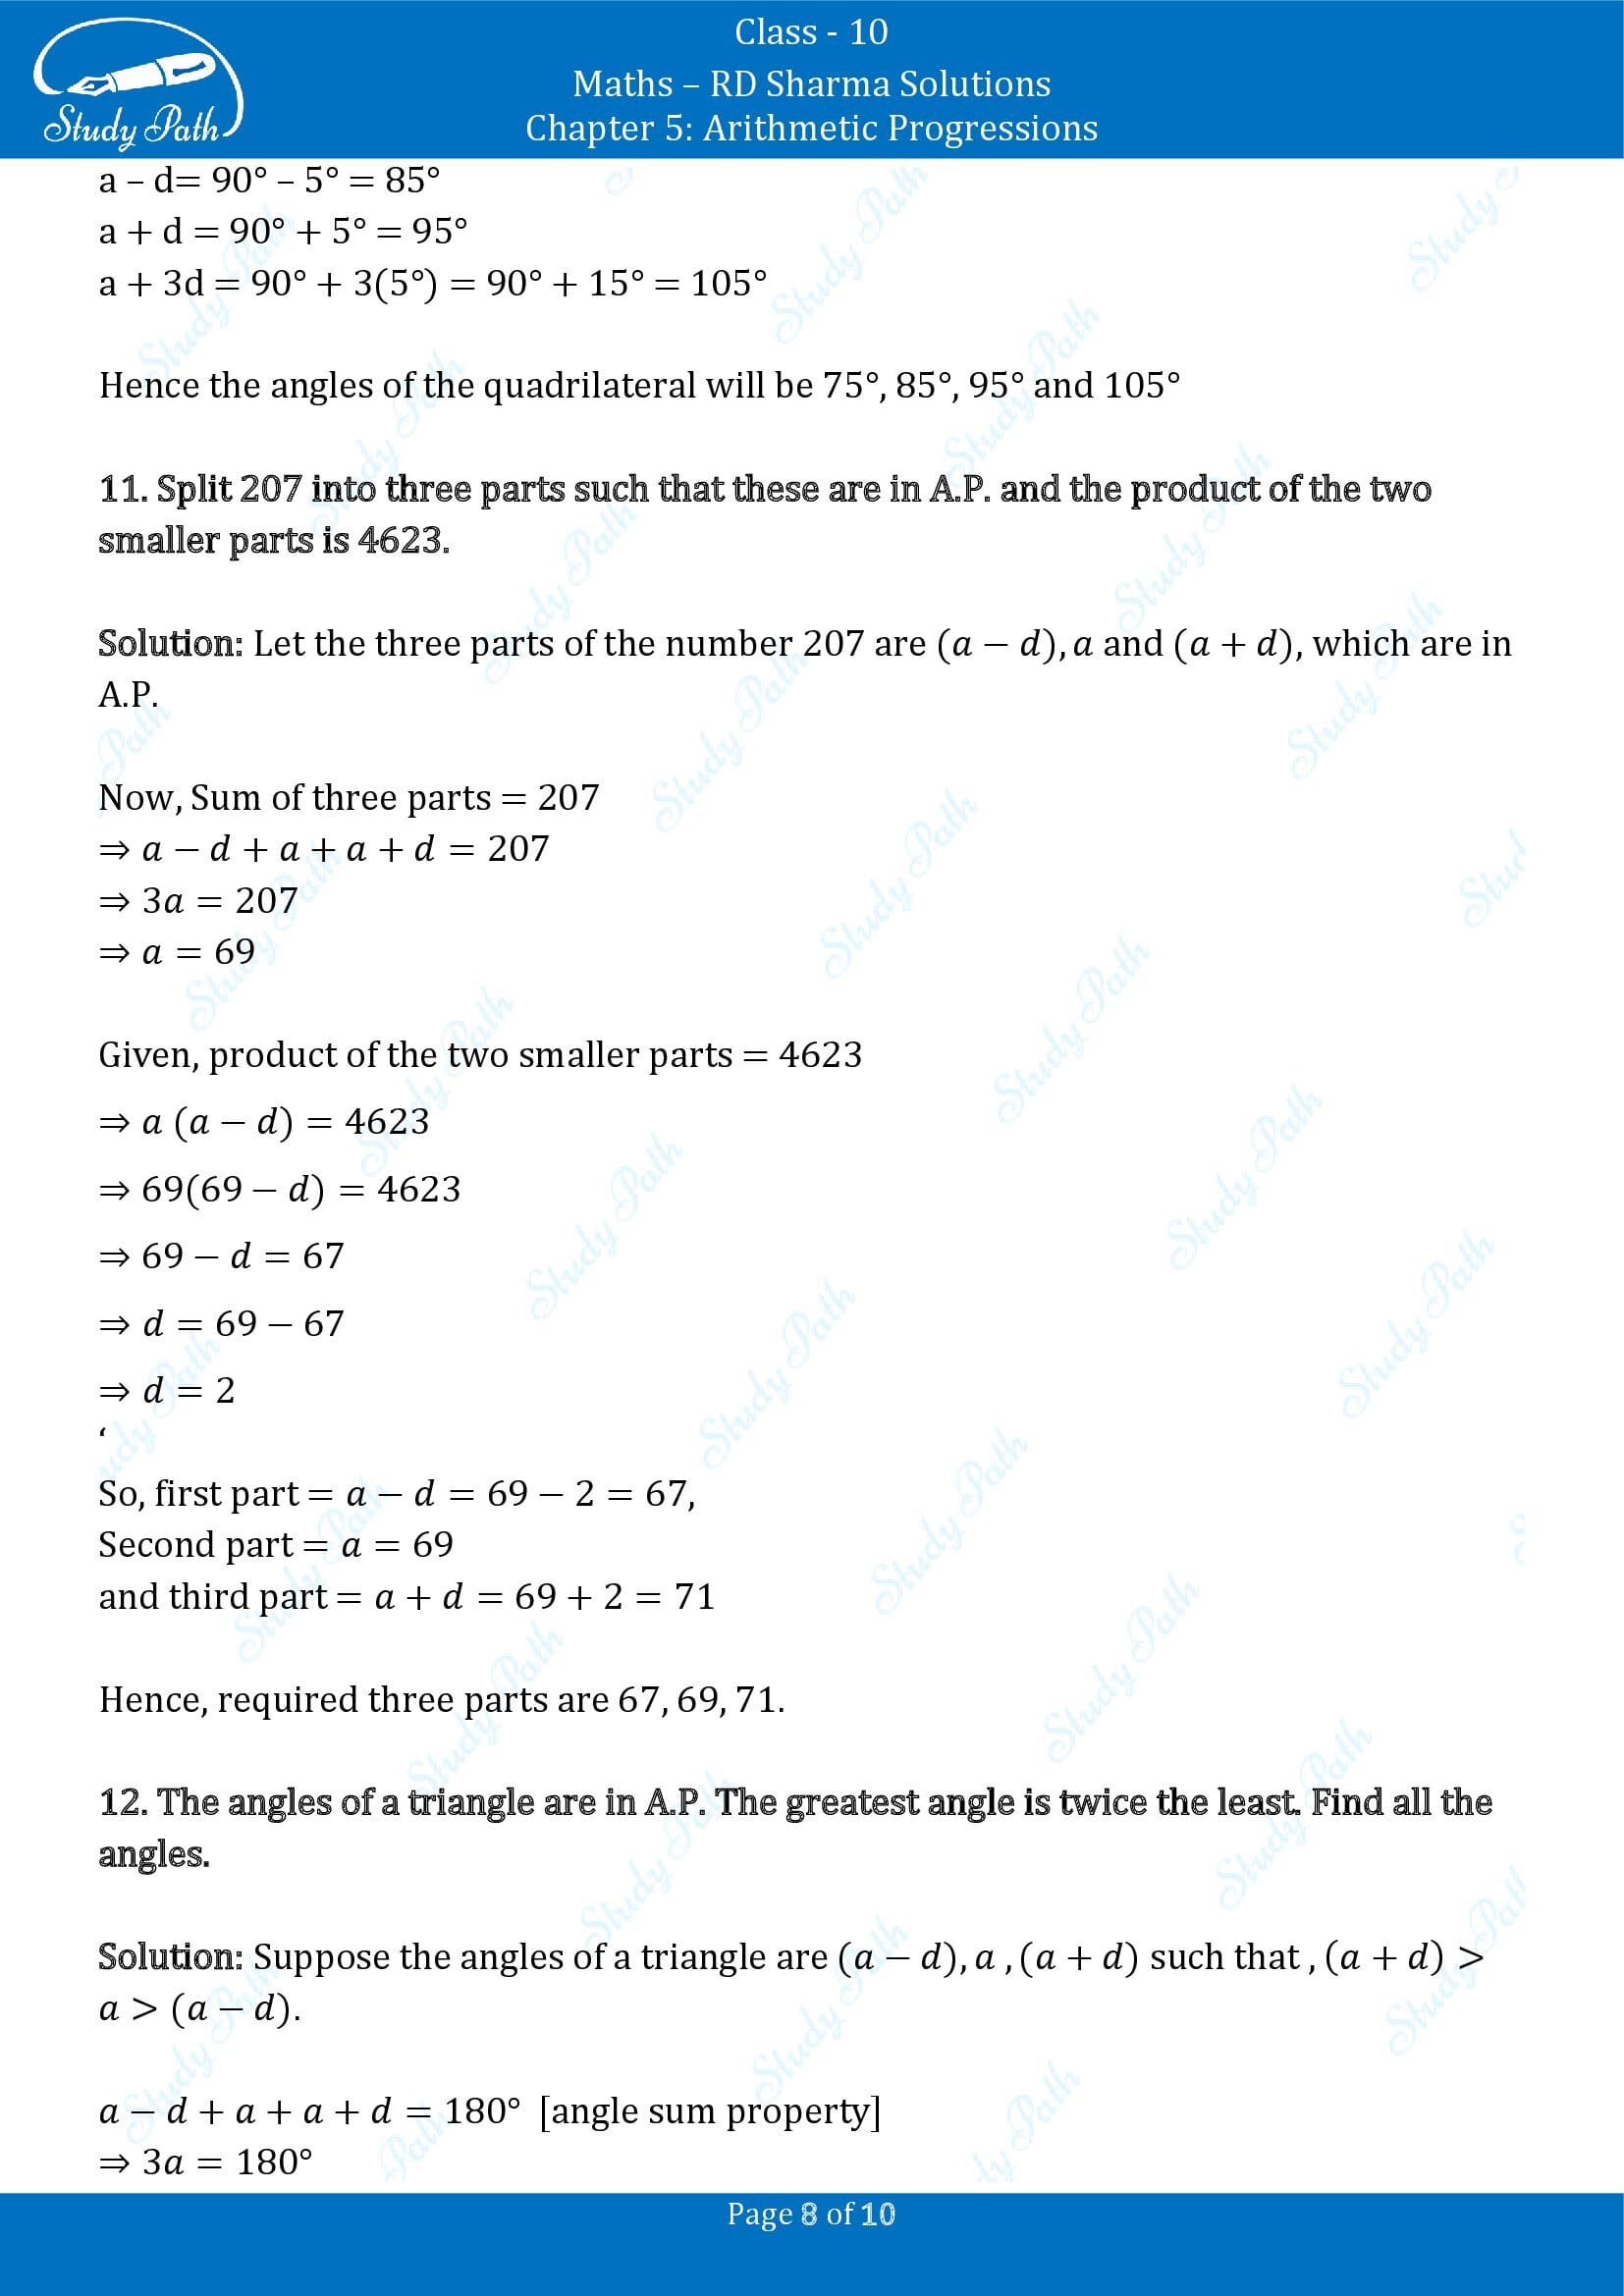 RD Sharma Solutions Class 10 Chapter 5 Arithmetic Progressions Exercise 5.5 00008